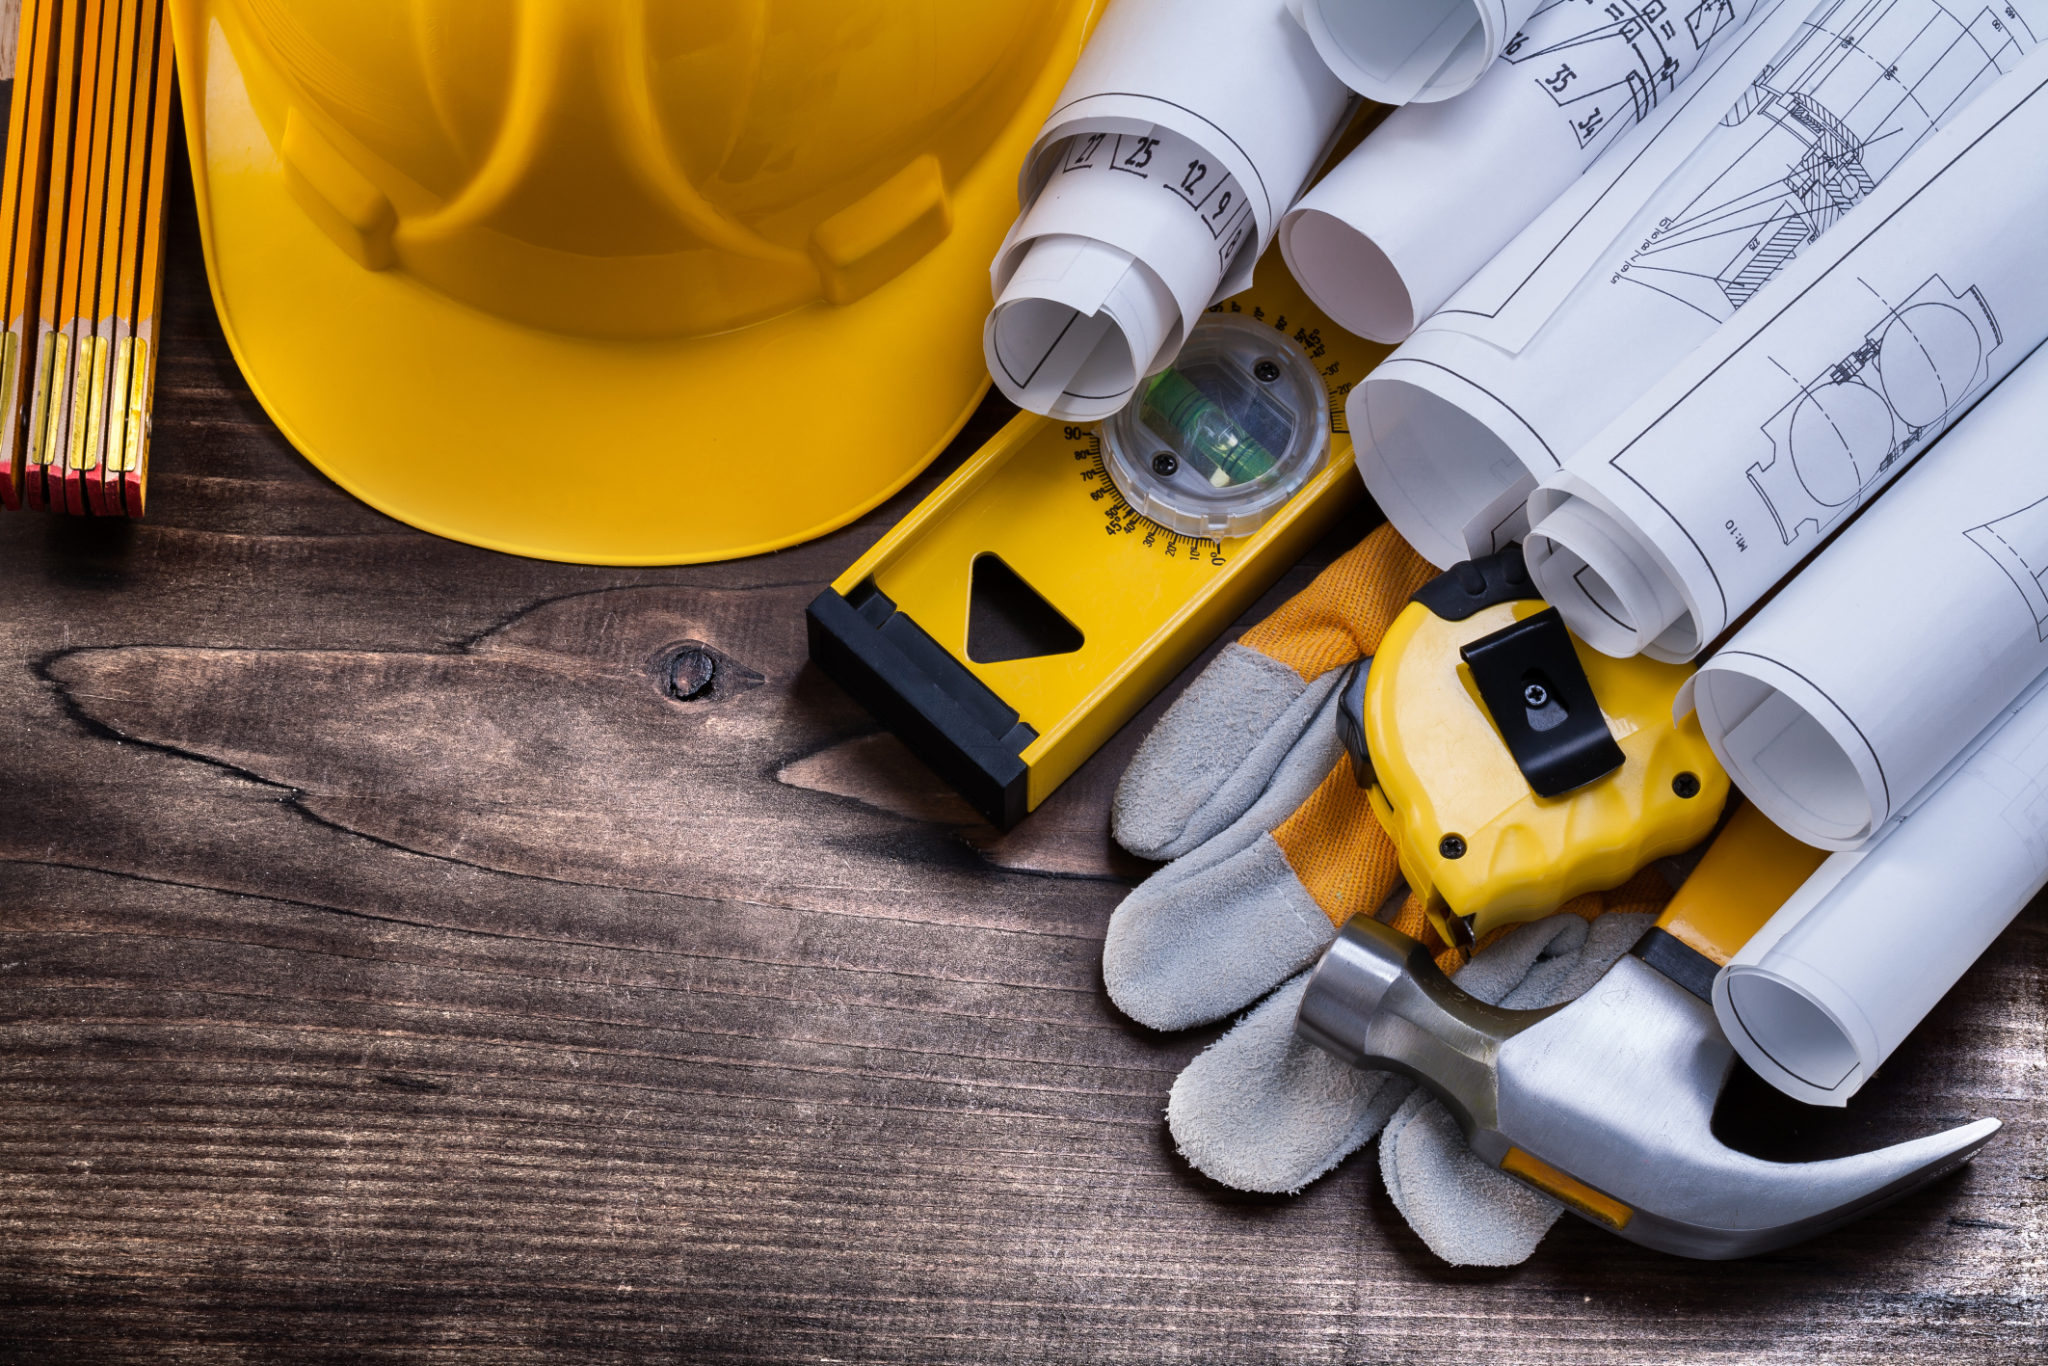 General Contractors Insurance Guide Tips on Saving & More